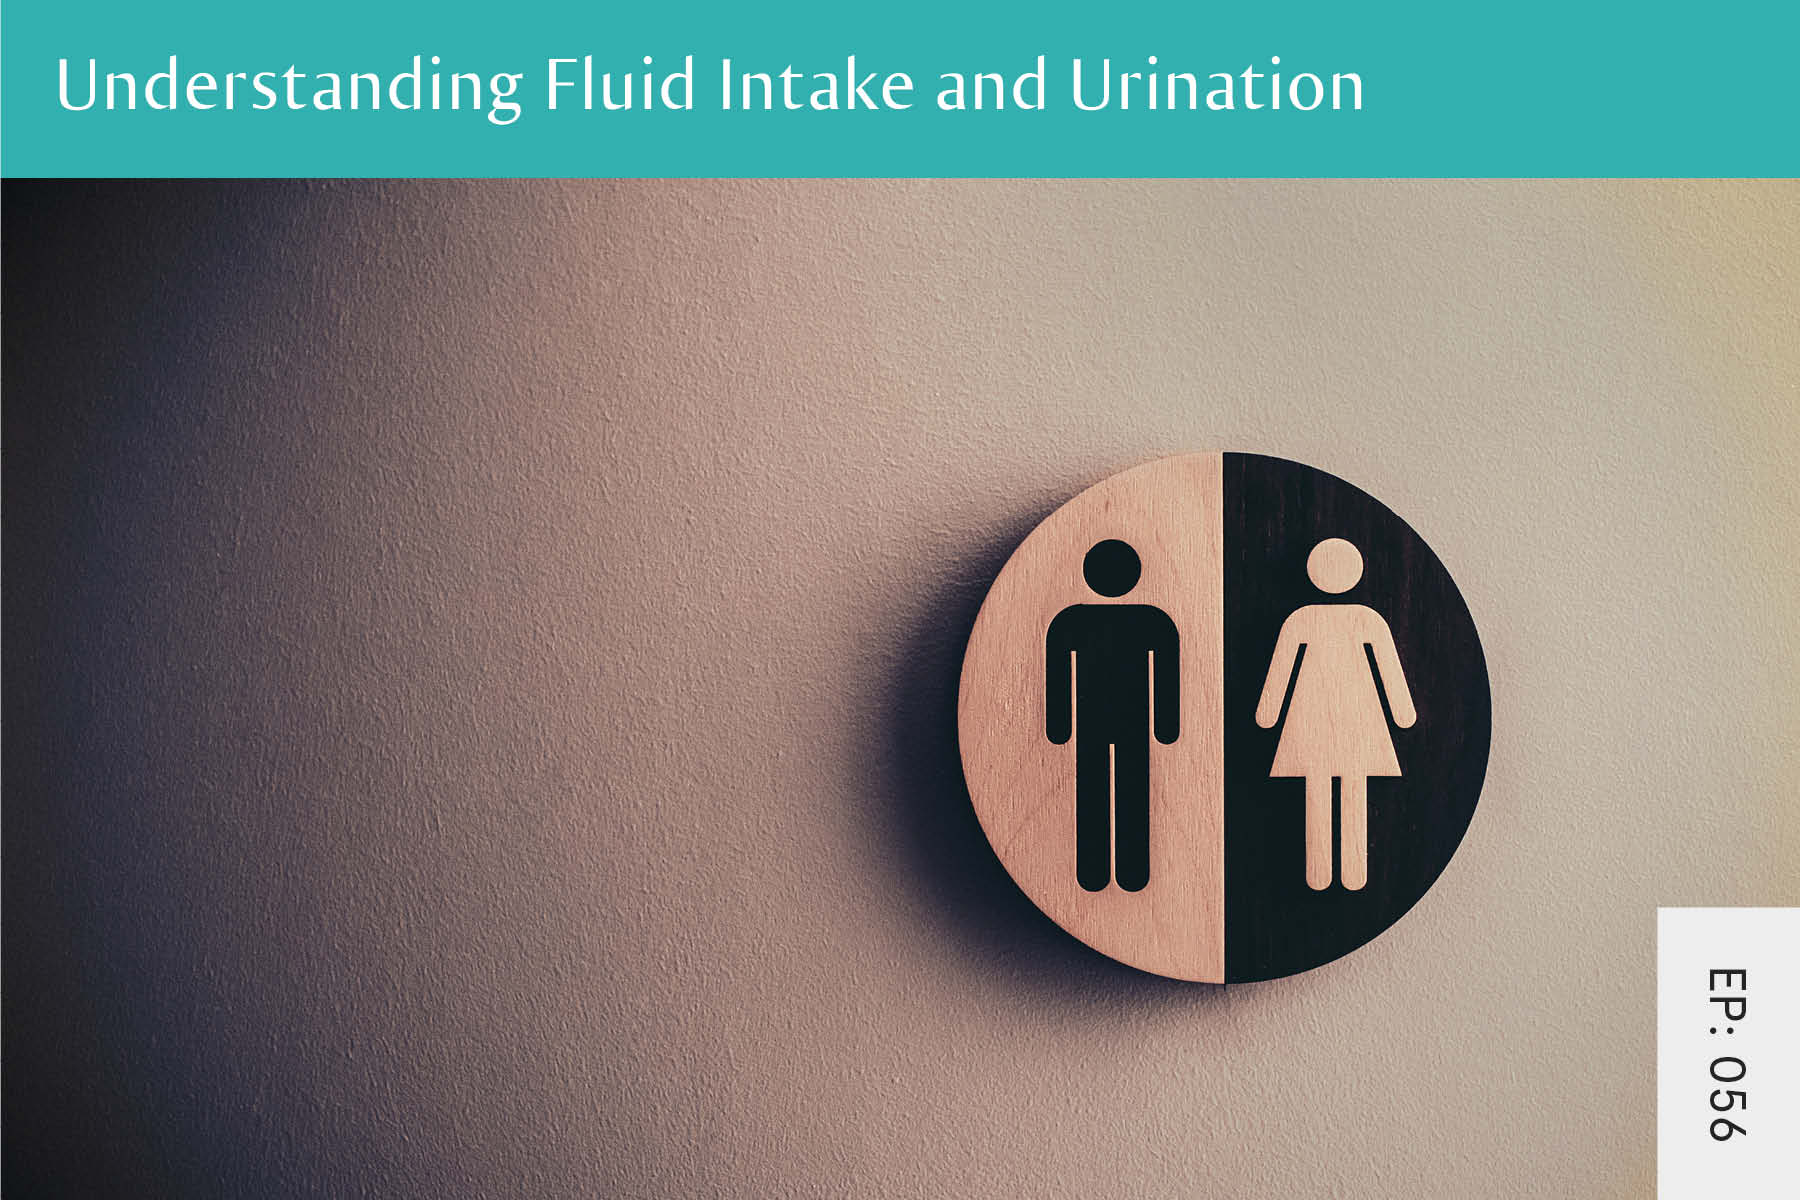 056: Understanding Fluid Intake and Urination - Seven Health: Eating Disorder Recovery and Anti Diet Nutritionist